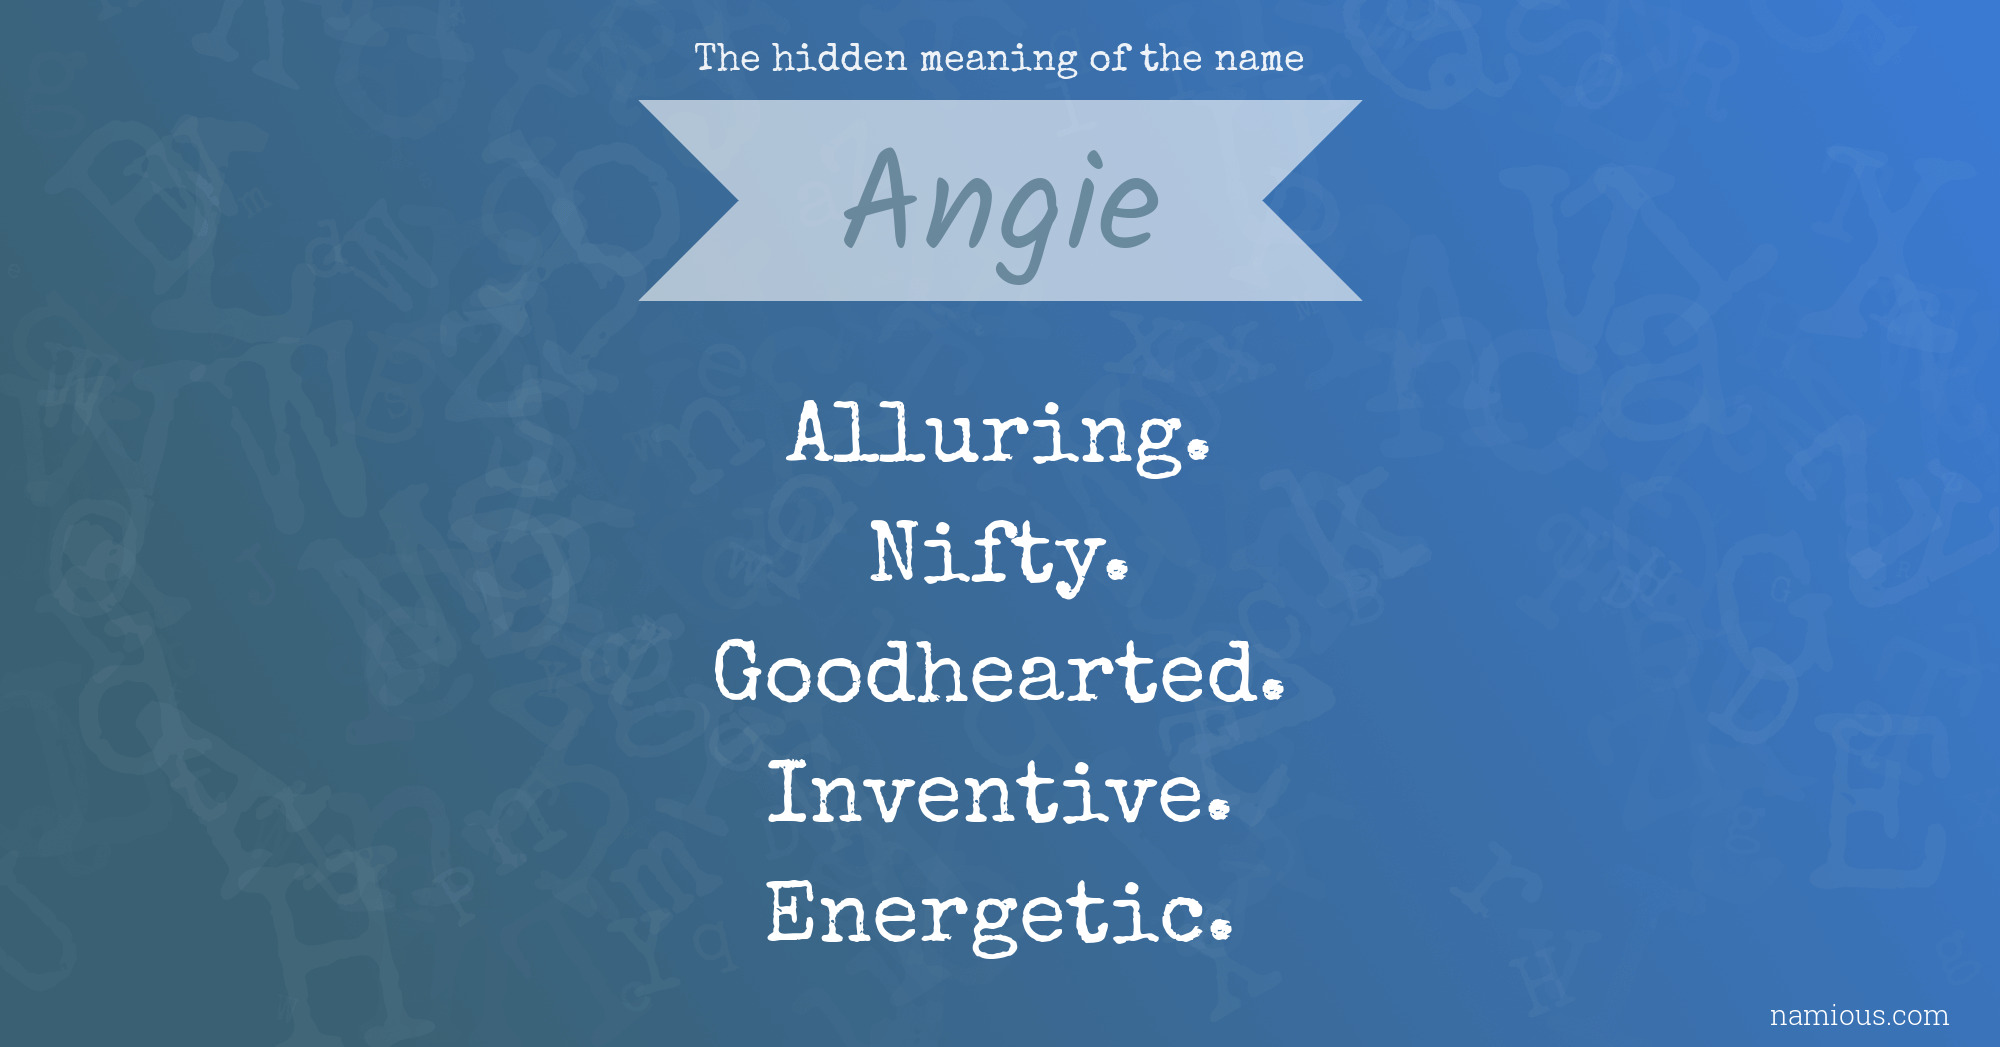 The Hidden Meaning Of The Name Angie Namious